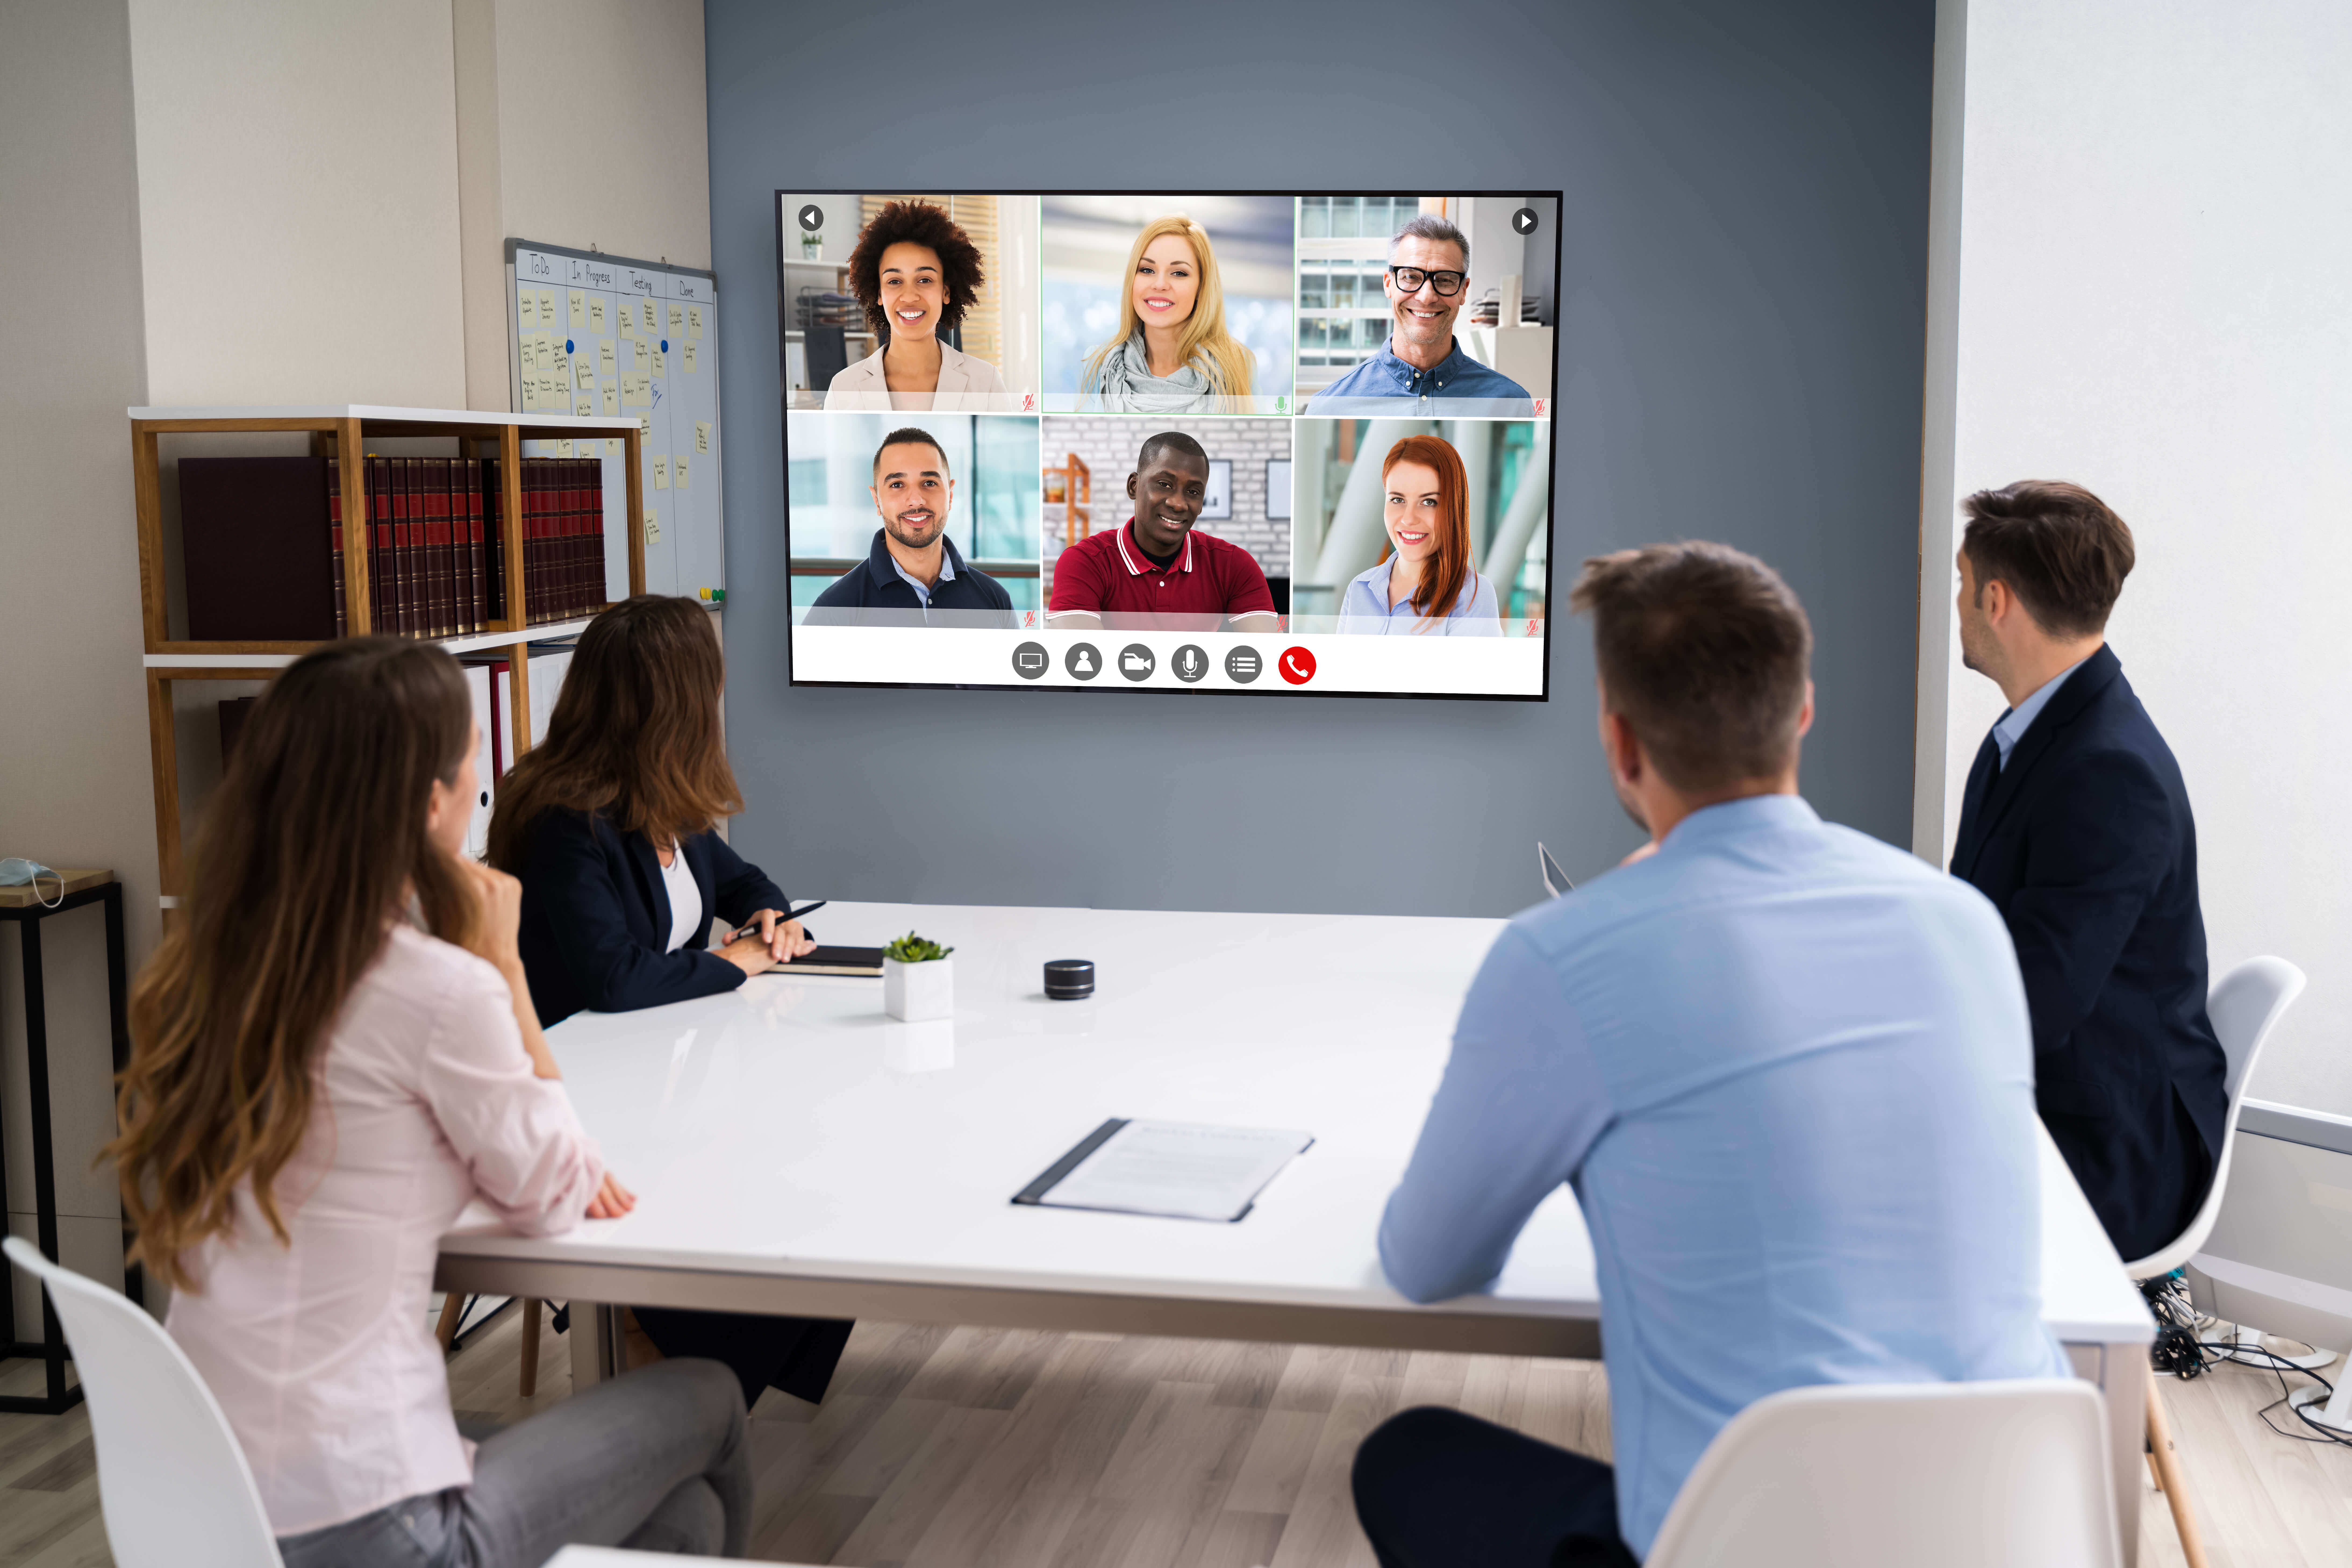 5 Benefits and Challenges of Combining Live and Virtual Experiences for a Hybrid Meeting Model